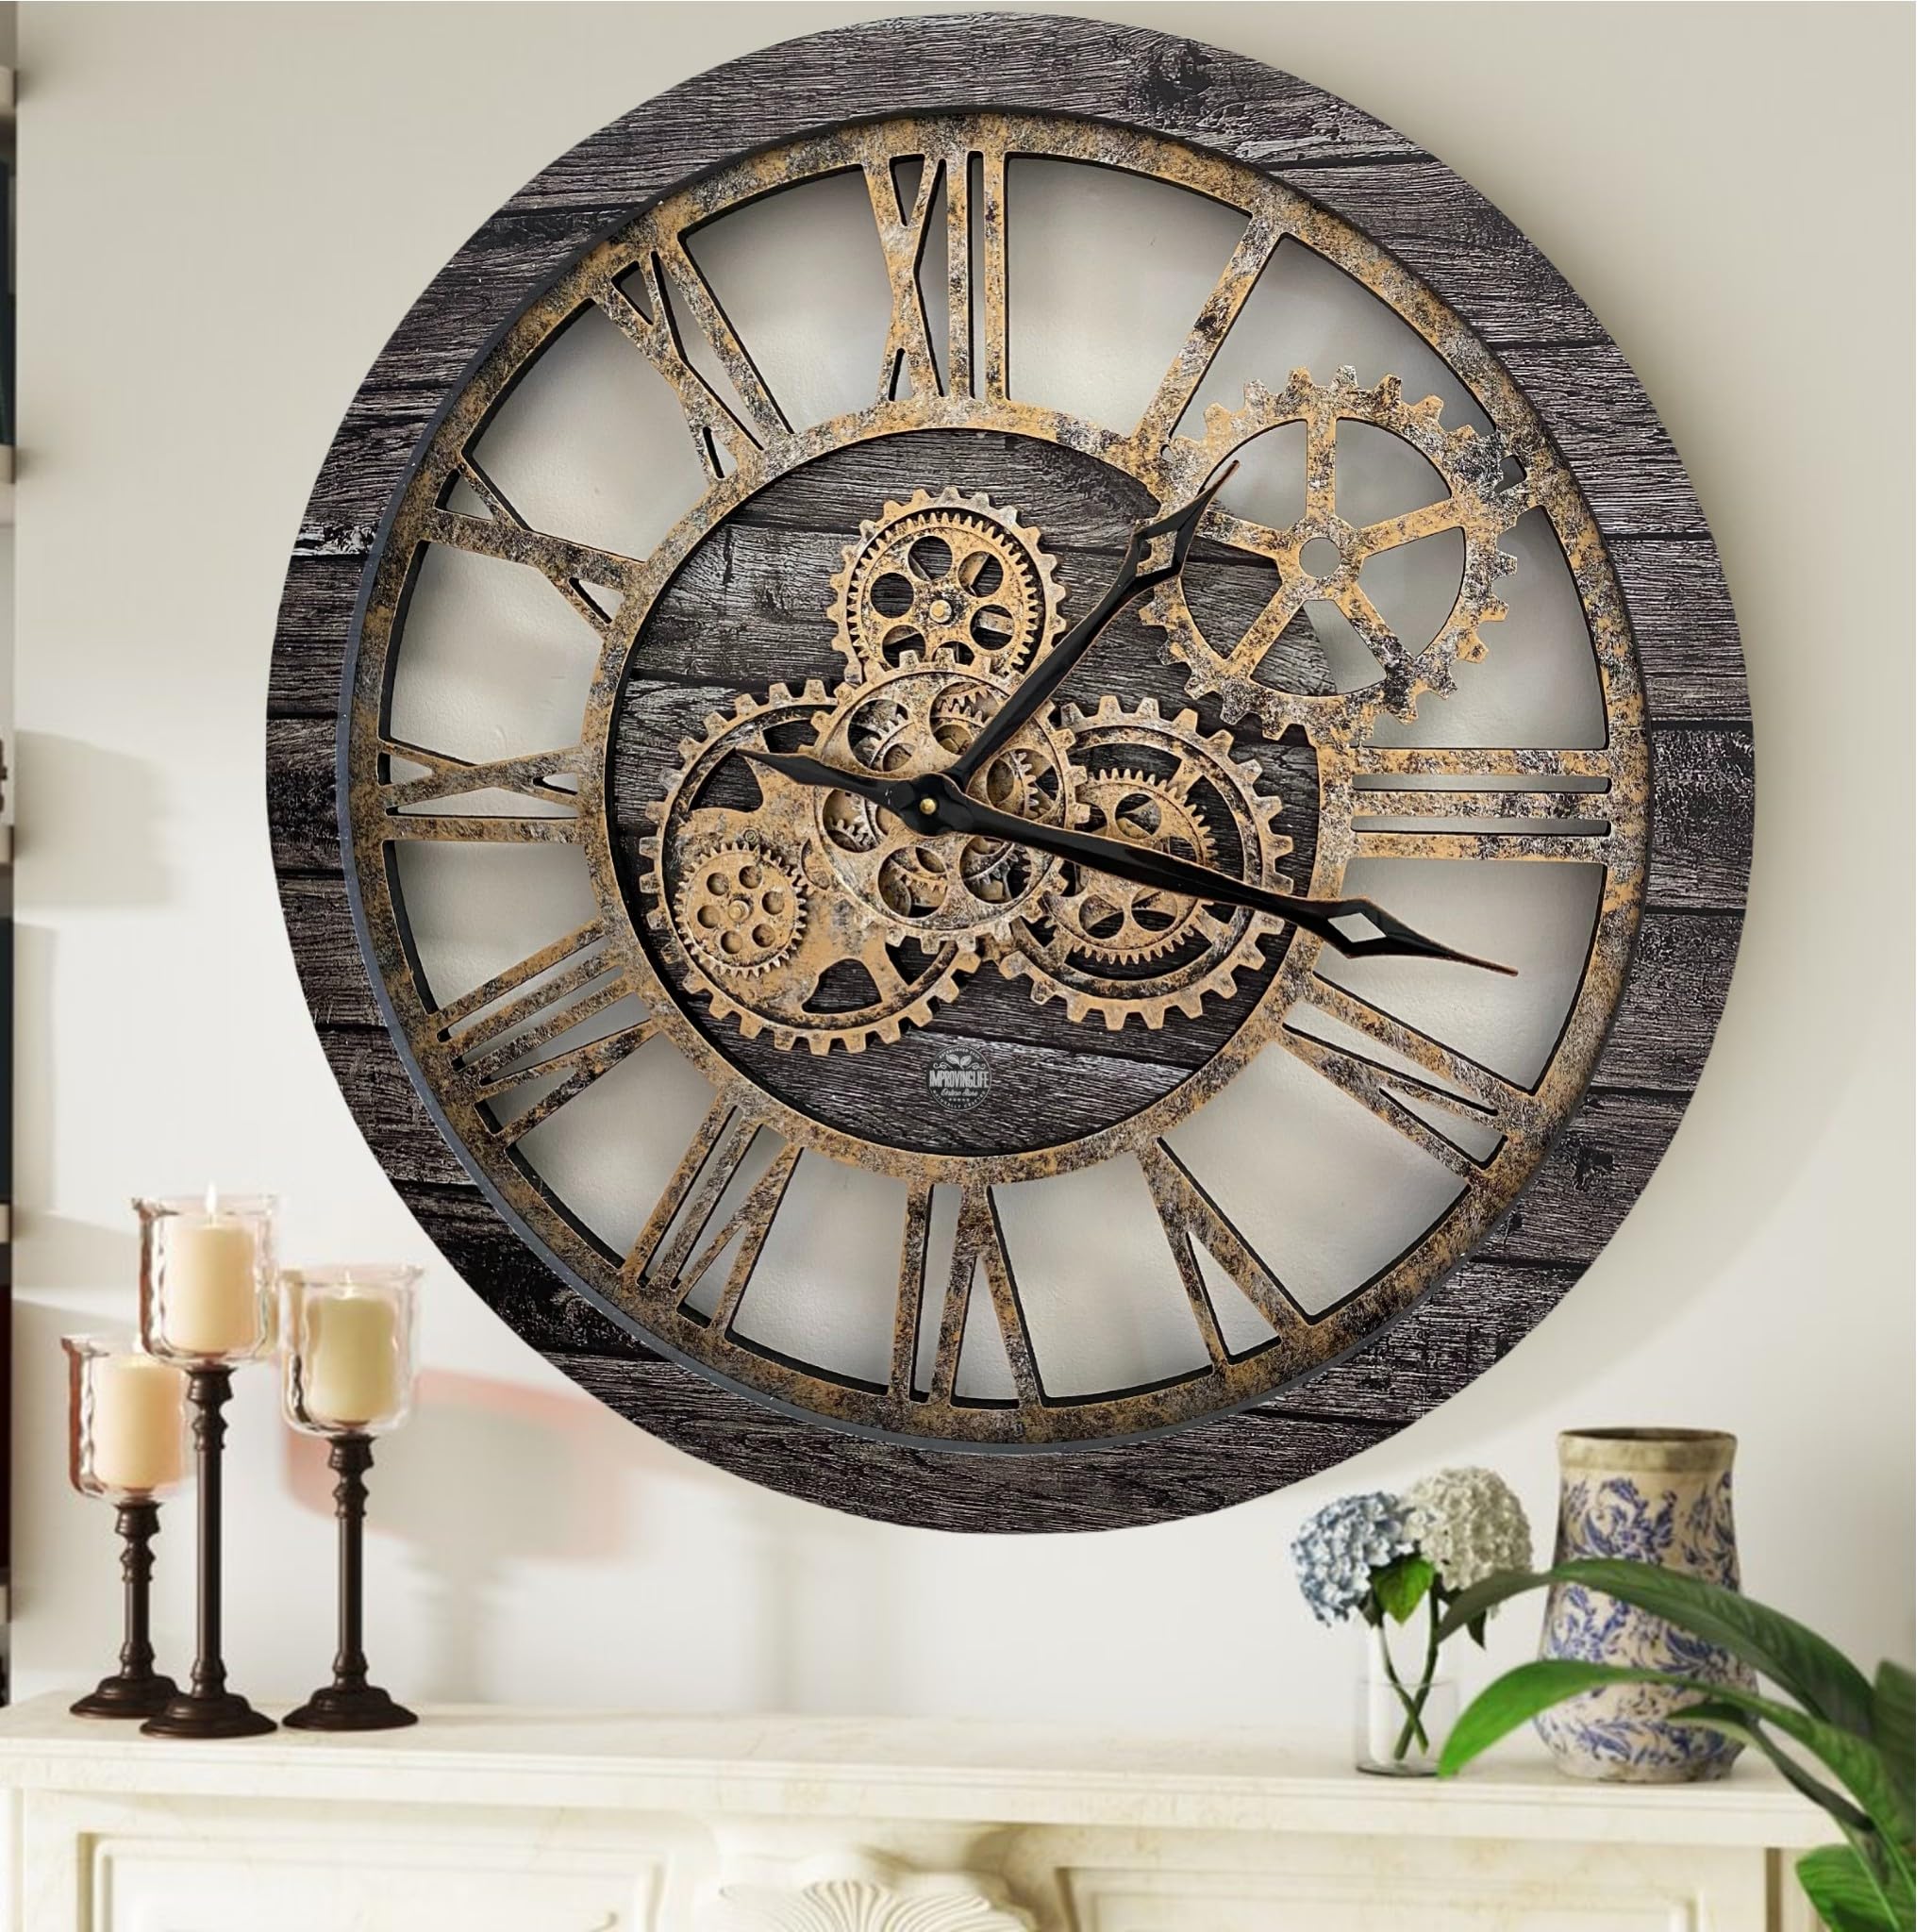 improvinglife The Gears Clock The Original Real Moving Gear Wall Clock Vintage Industrial Oversized Rustic Farmhouse (24 inch (60cm), Vintage 